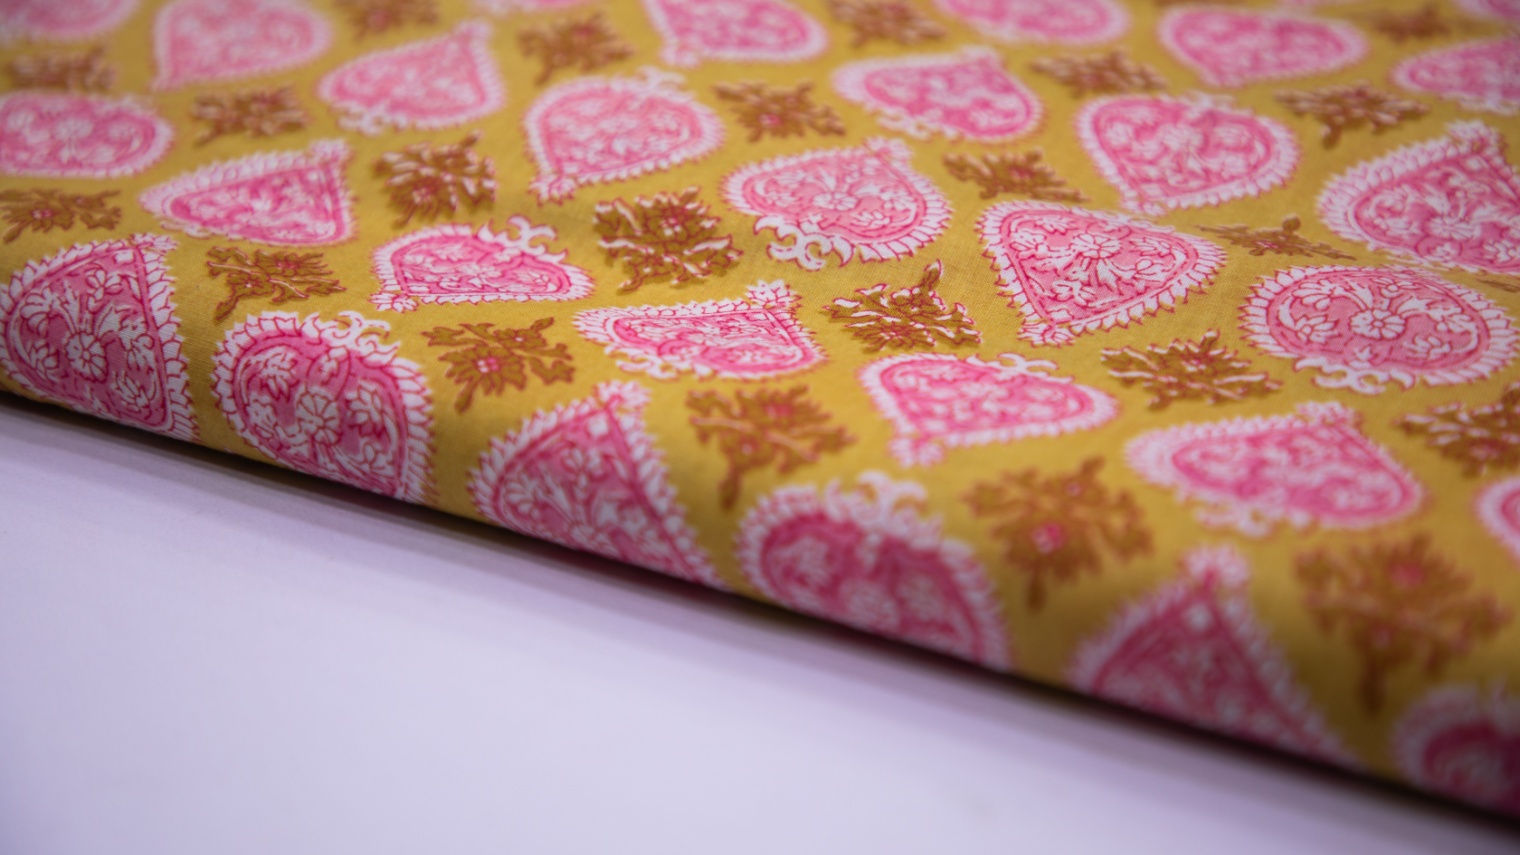 PINEAPPLE YELLOW COLOR COTTON SCREEN PRINT JAIPURI PINK ABSTRACT PATTERN FABRIC - 5683